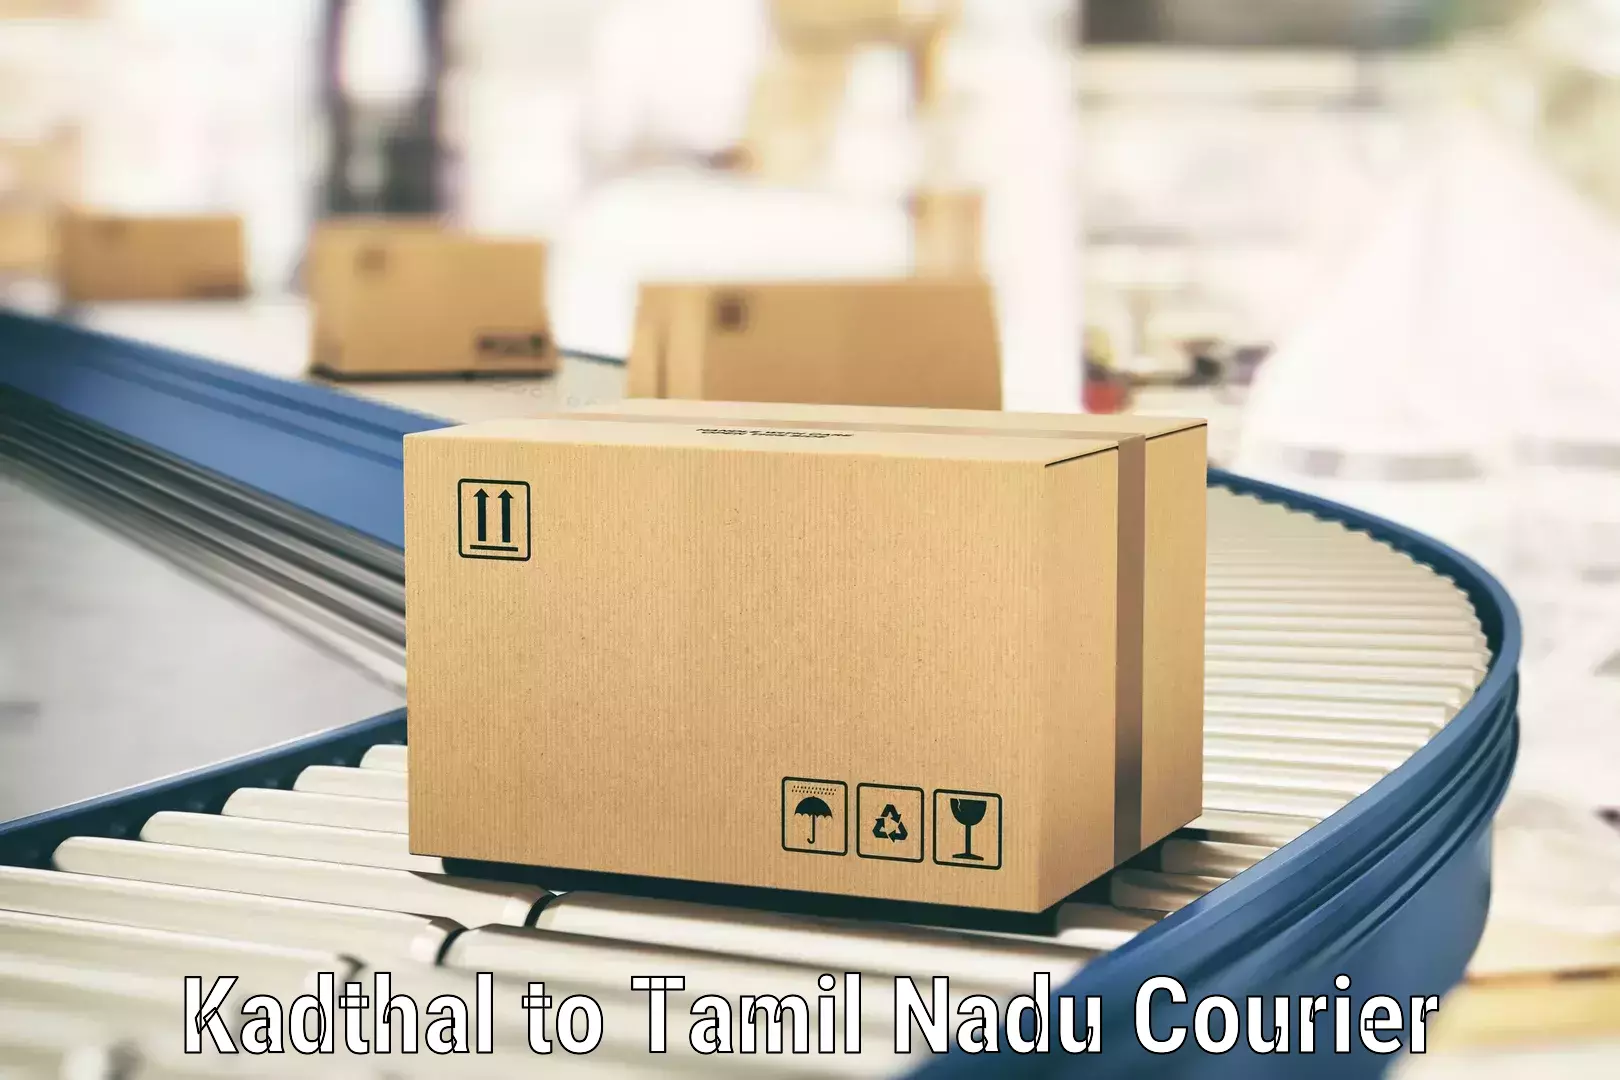 Online shipping calculator in Kadthal to Ennore Port Chennai